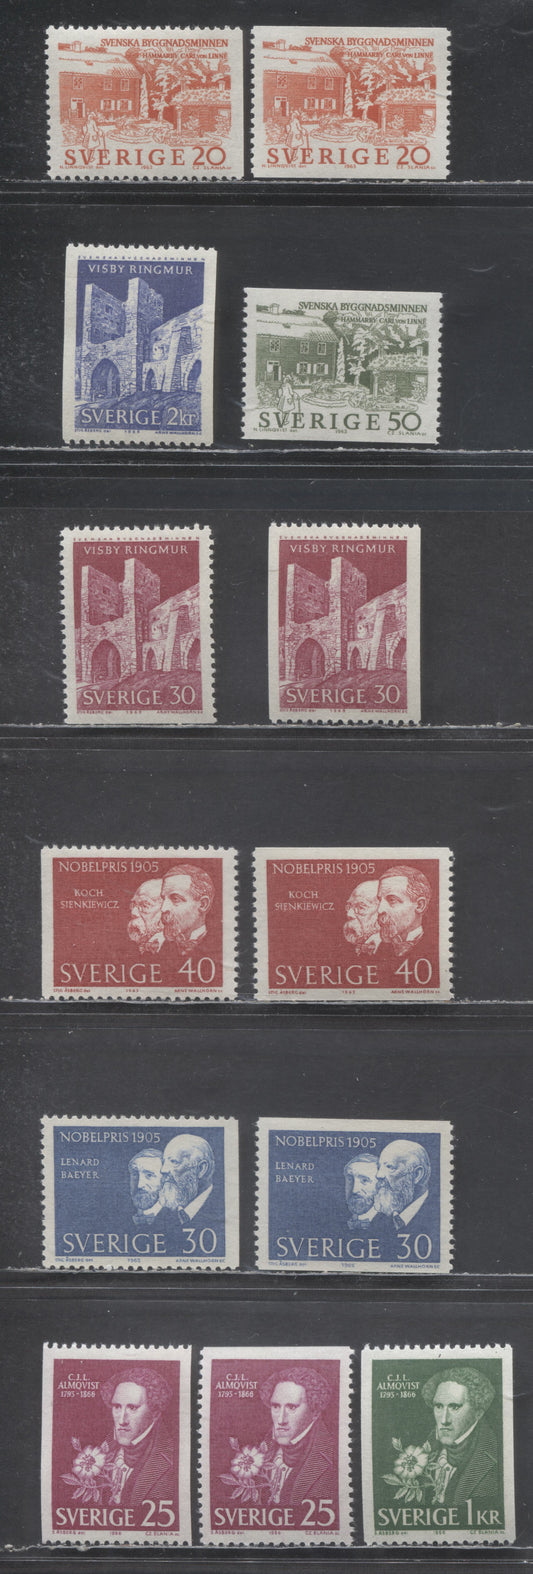 Lot 5 Sweden SC#634/709 1963 Carl Von Linne - 1966 Alqvist Issues, 13 VFNH Singles, Click on Listing to See ALL Pictures, 2017 Scott Cat. $10.65